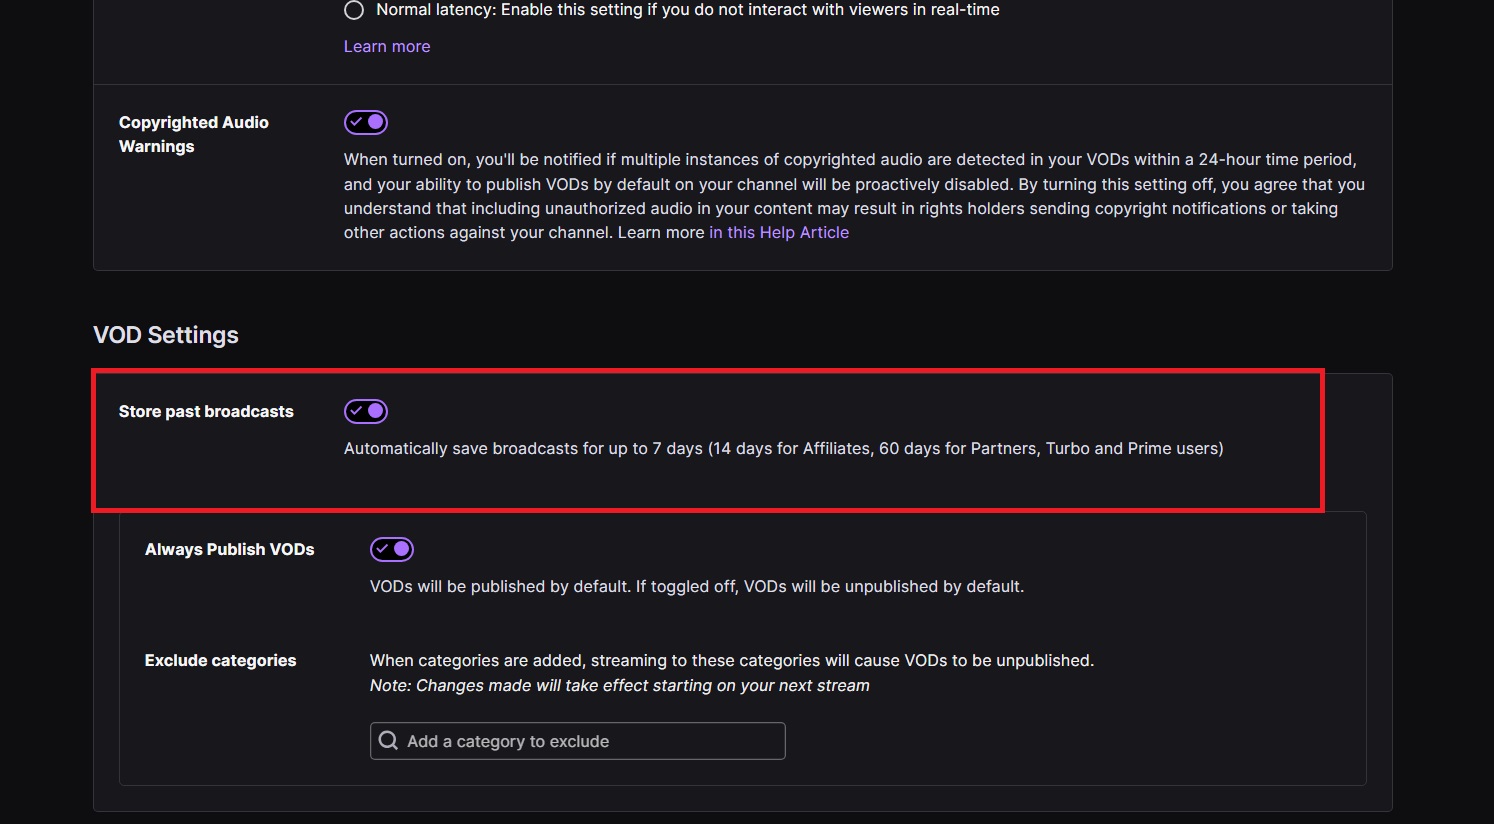 VOD settings on Twitch